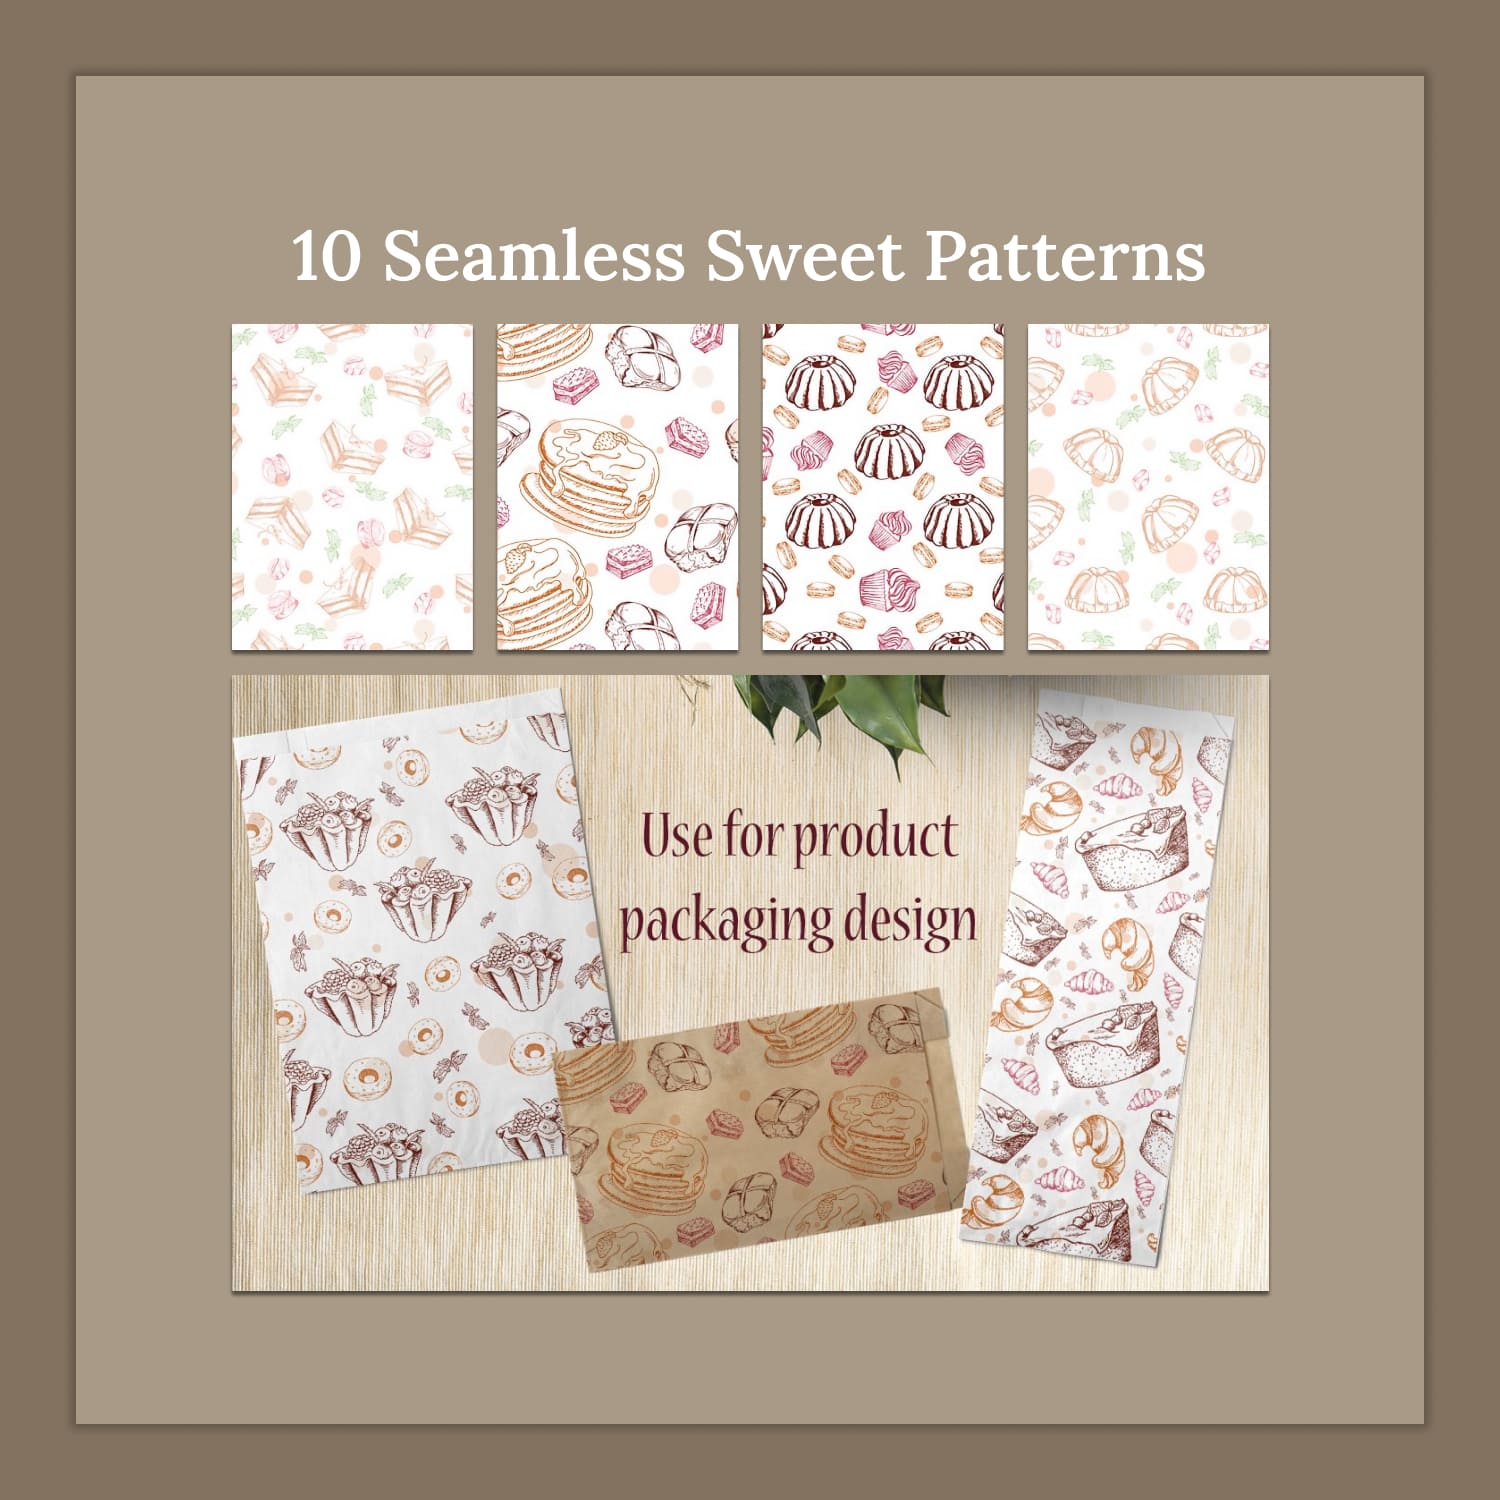 10 seamless sweet patterns - main image preview.